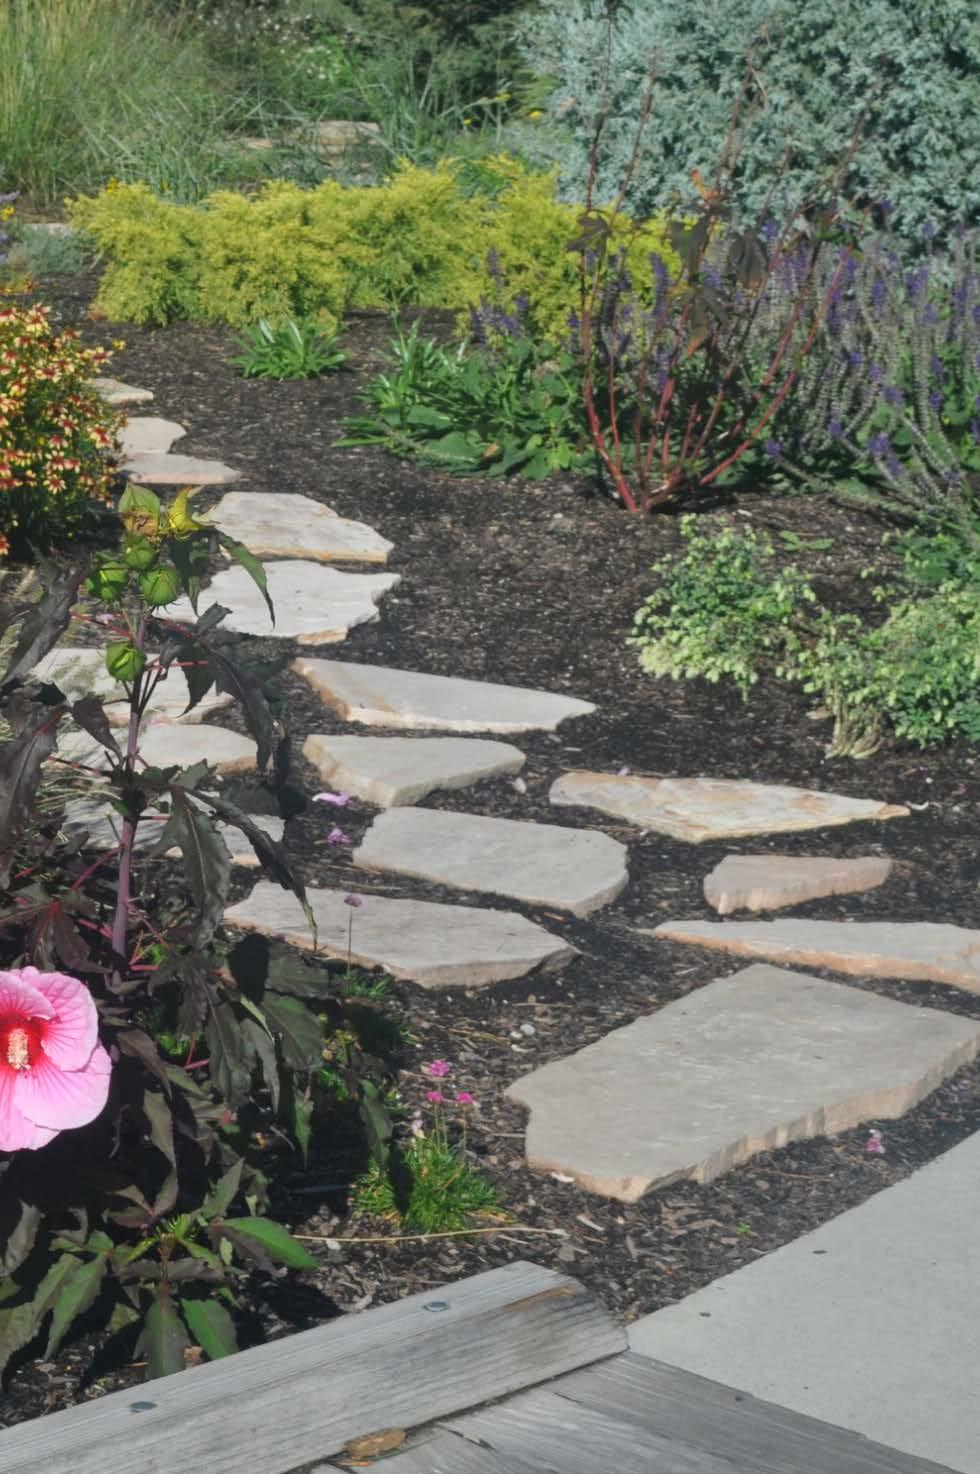 Weed control Maintenance Avoid compaction by creating paths or adding stepping stones